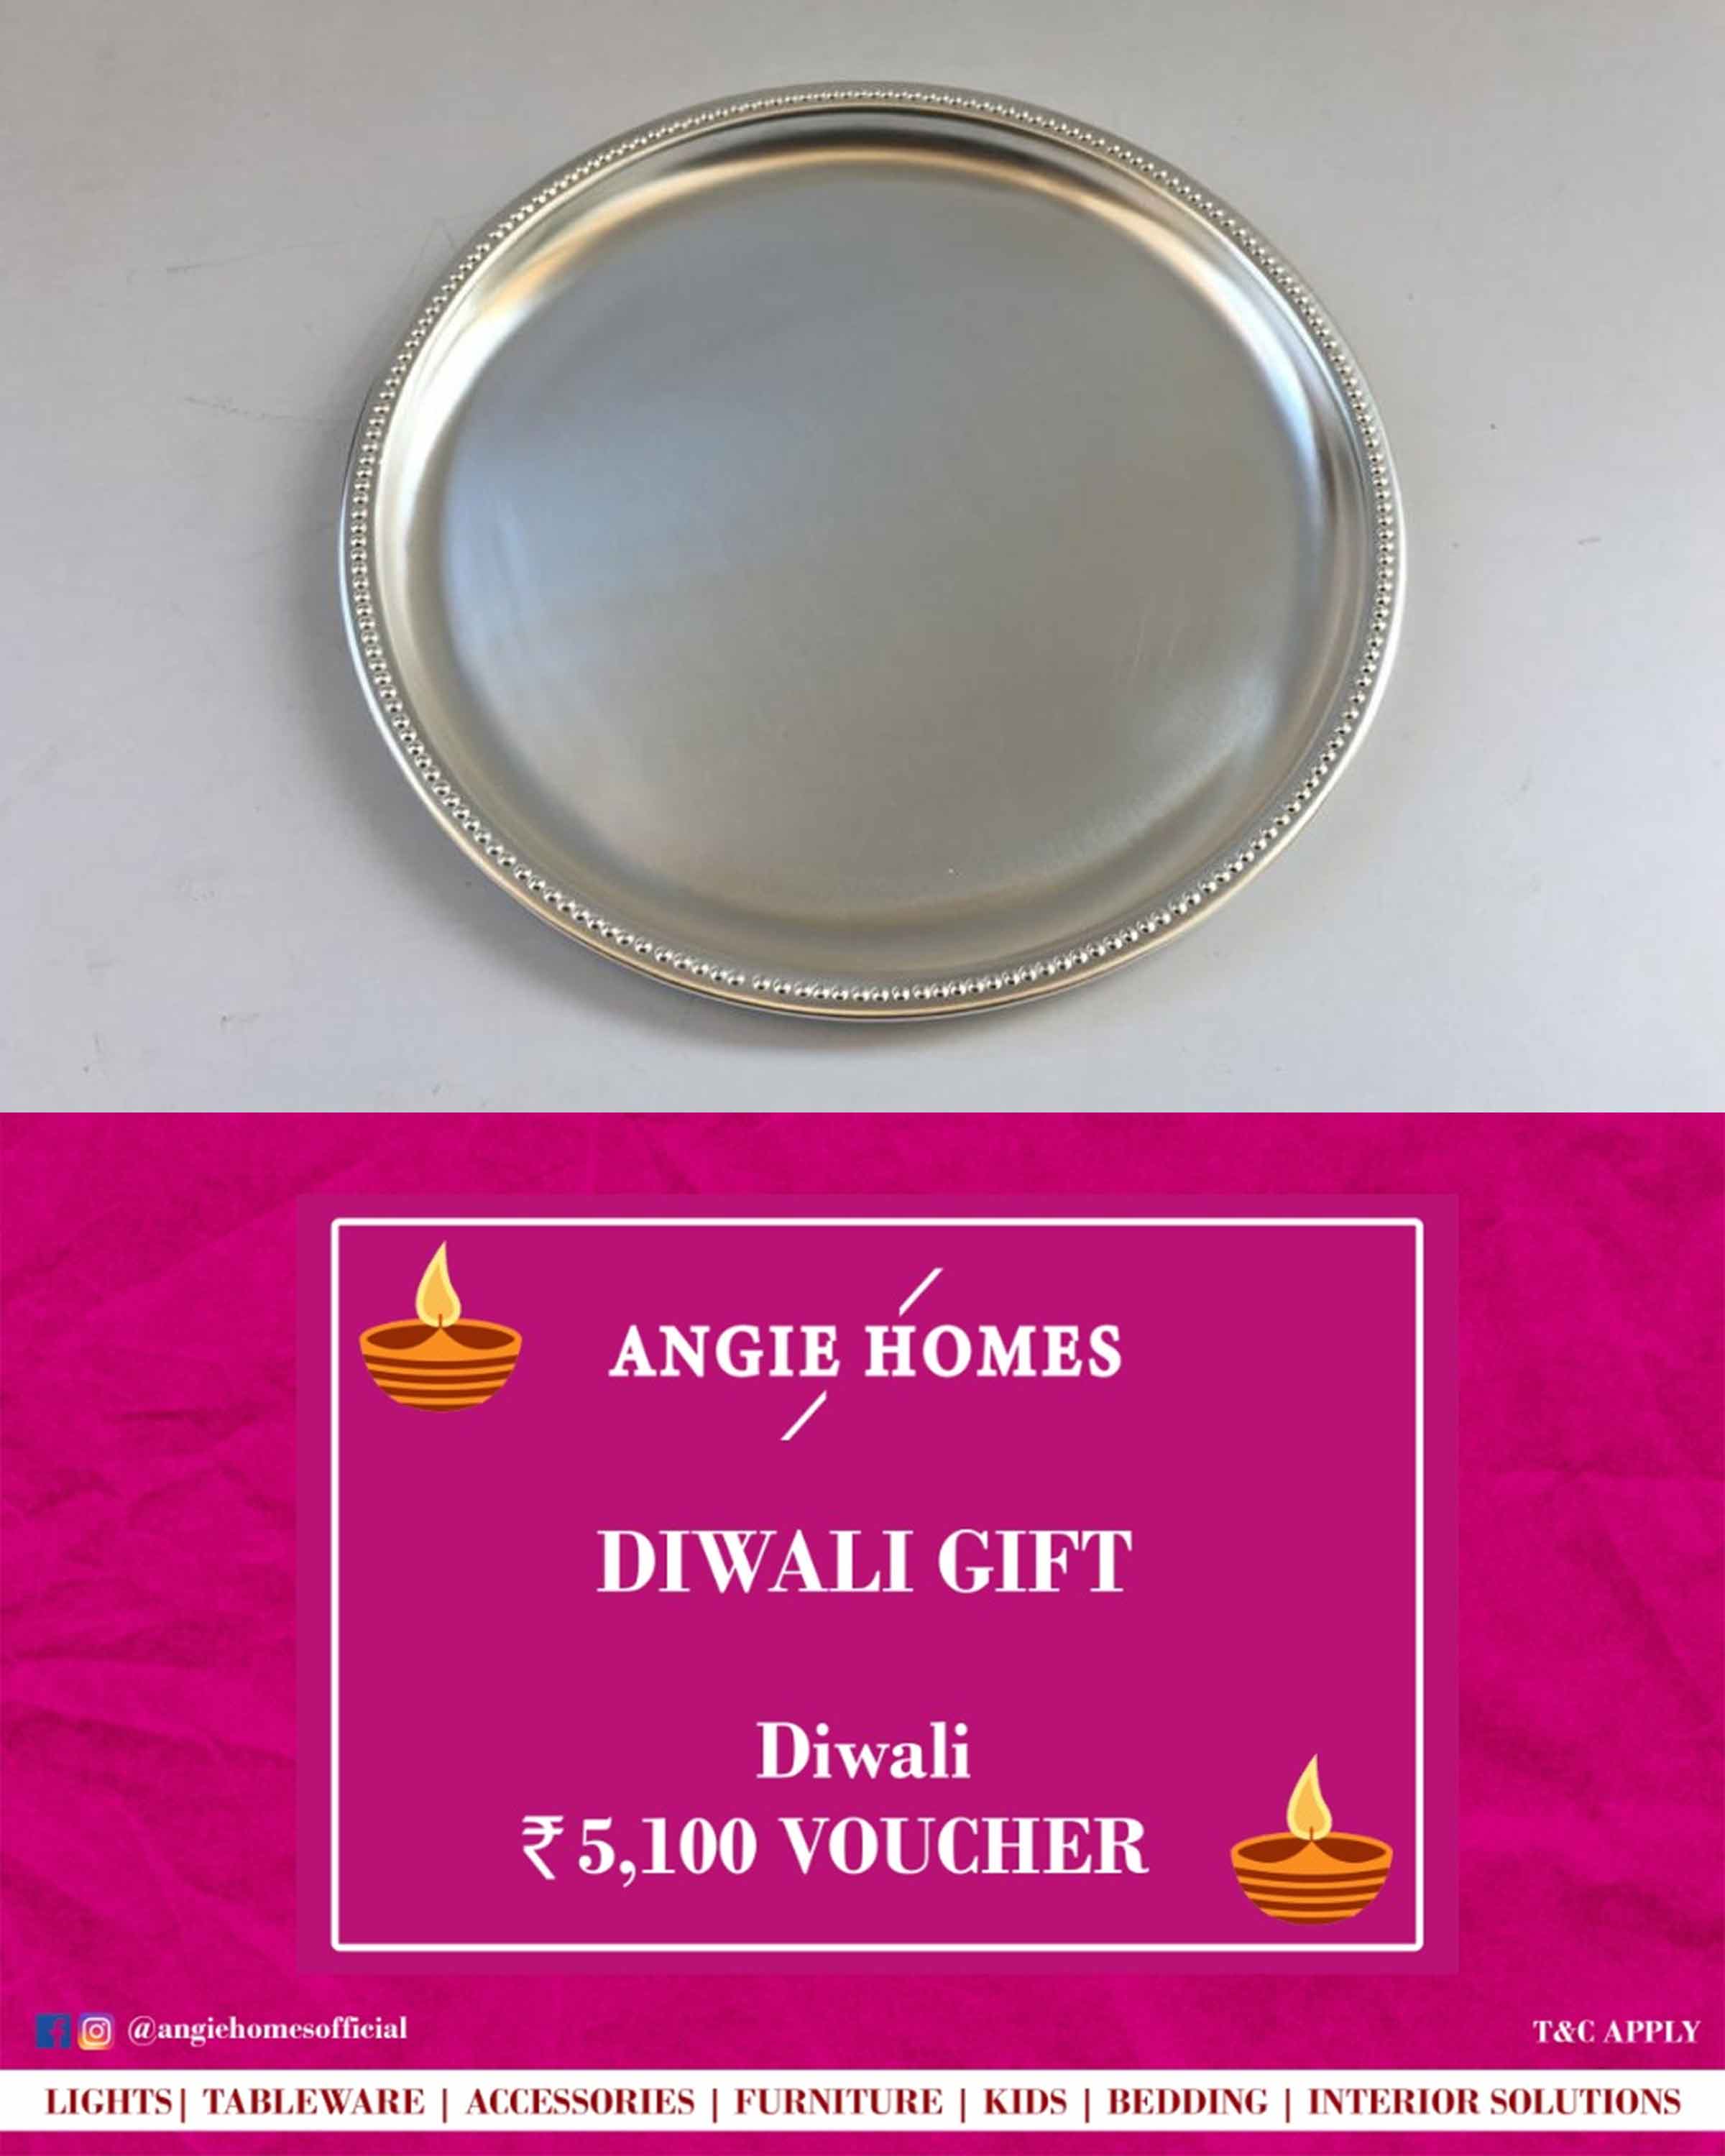 Online Diwali Gift Card Voucher for Silver Plated Round Plate | Tableware ANGIE HOMES